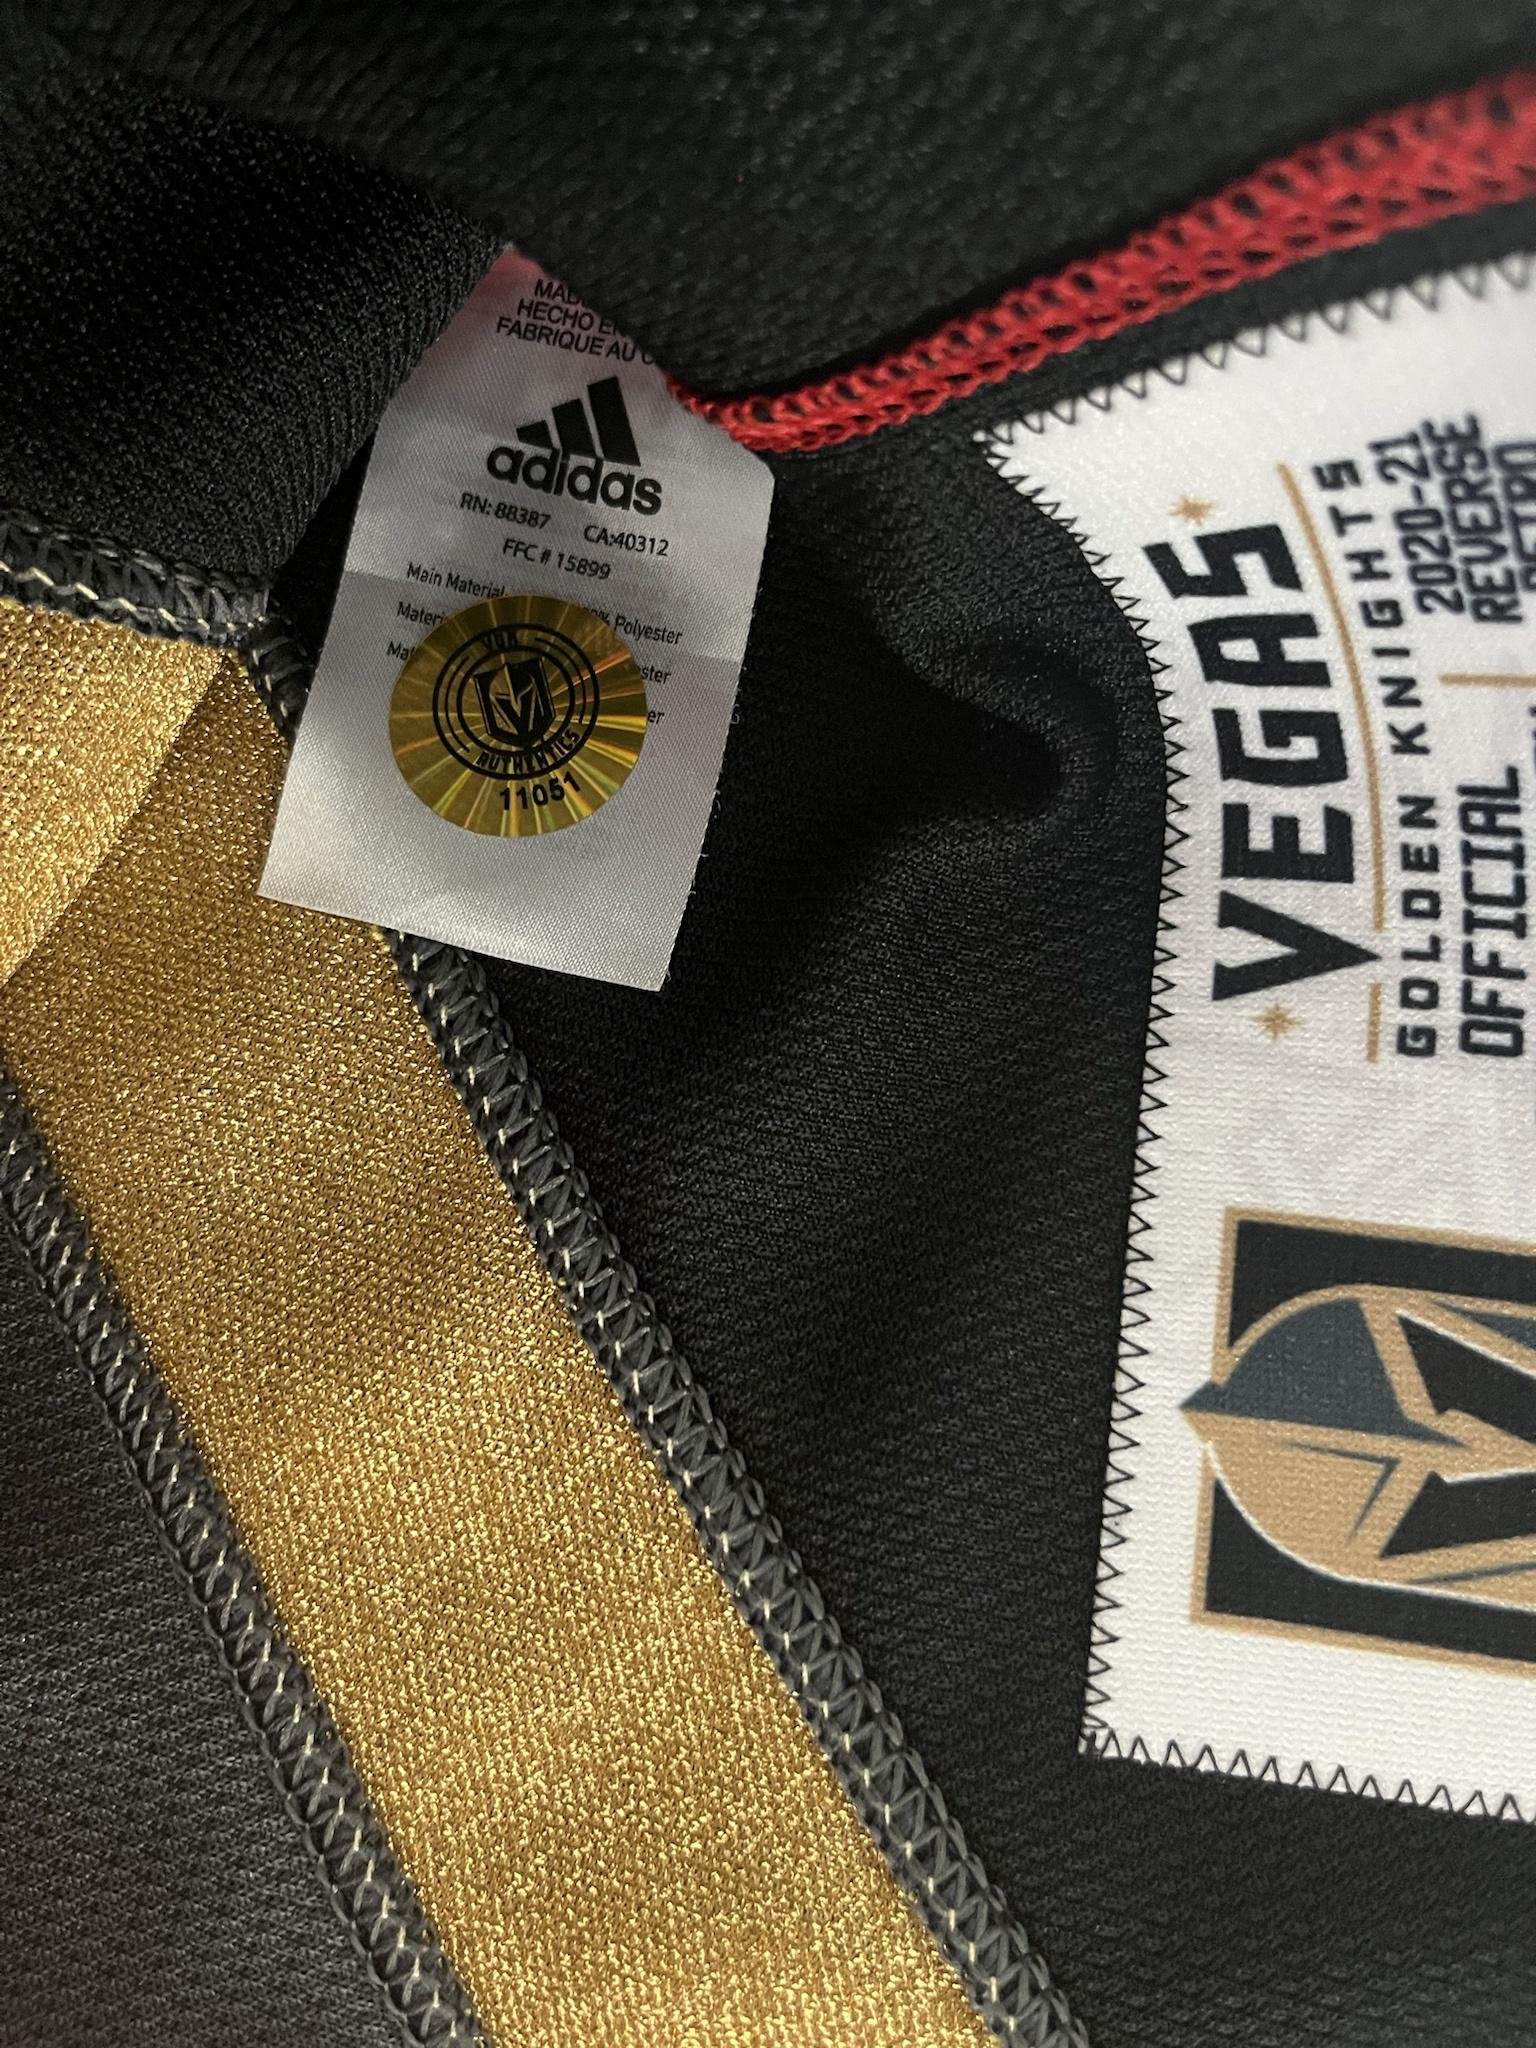 When you have a game at 7 and a rave at 10 🪩 How do you like the  @vegasgoldenknights #reverseretro drop?